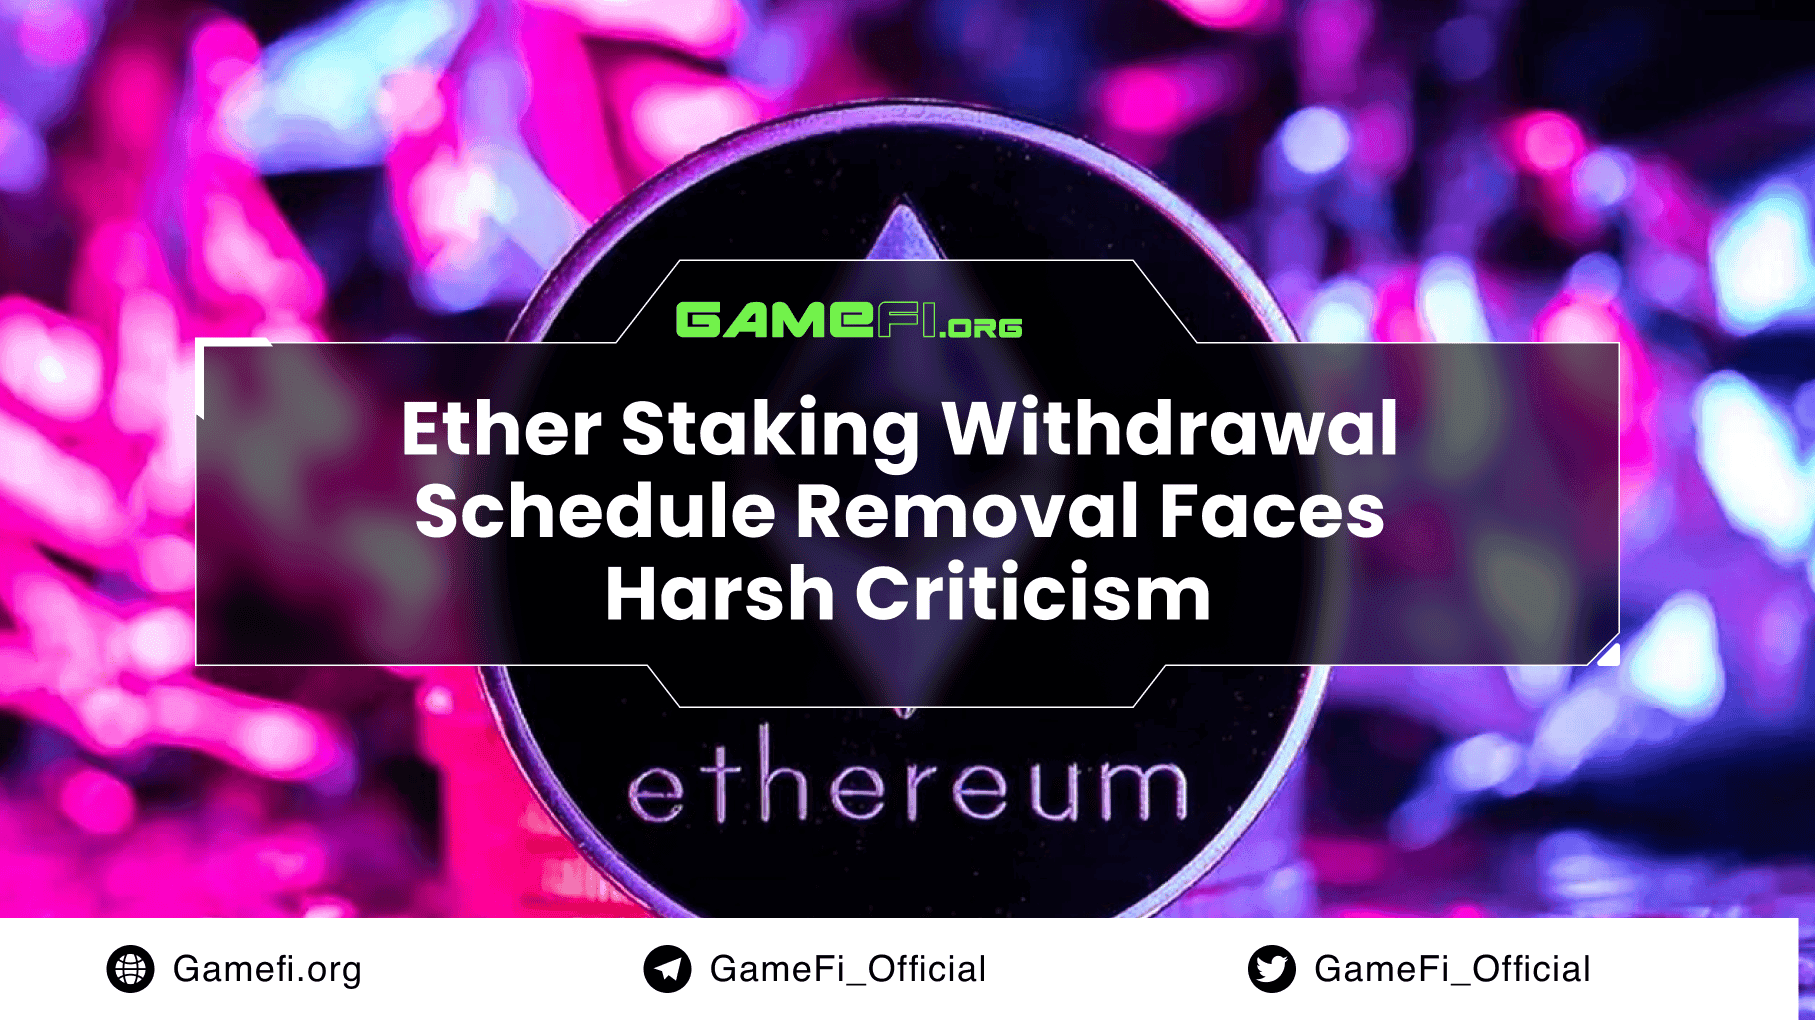 Ether Staking Withdrawal Schedule Removal Faces Harsh Criticism